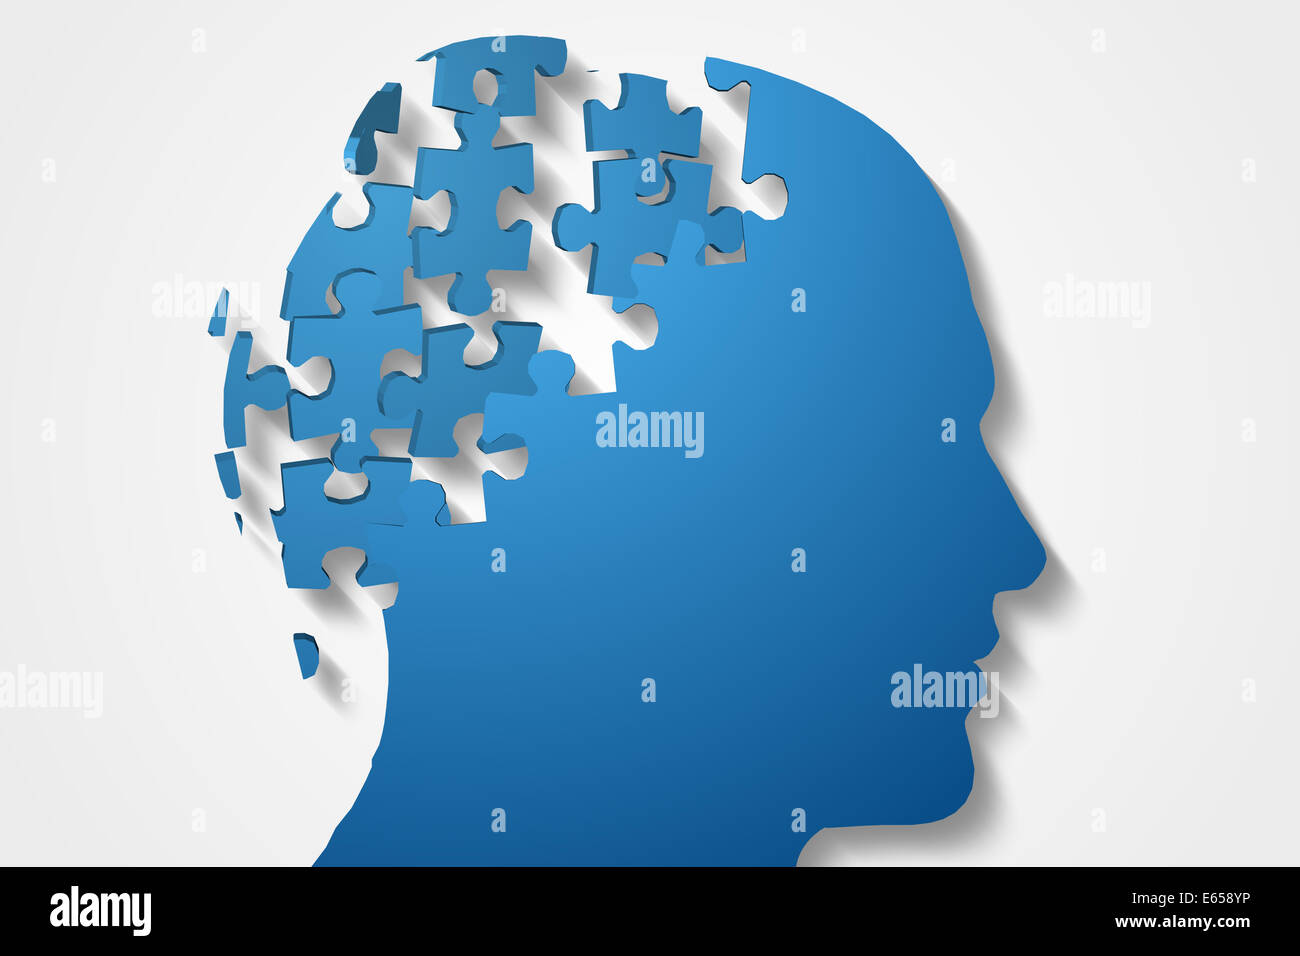 Blue jigsaw head with missing pieces Stock Photo